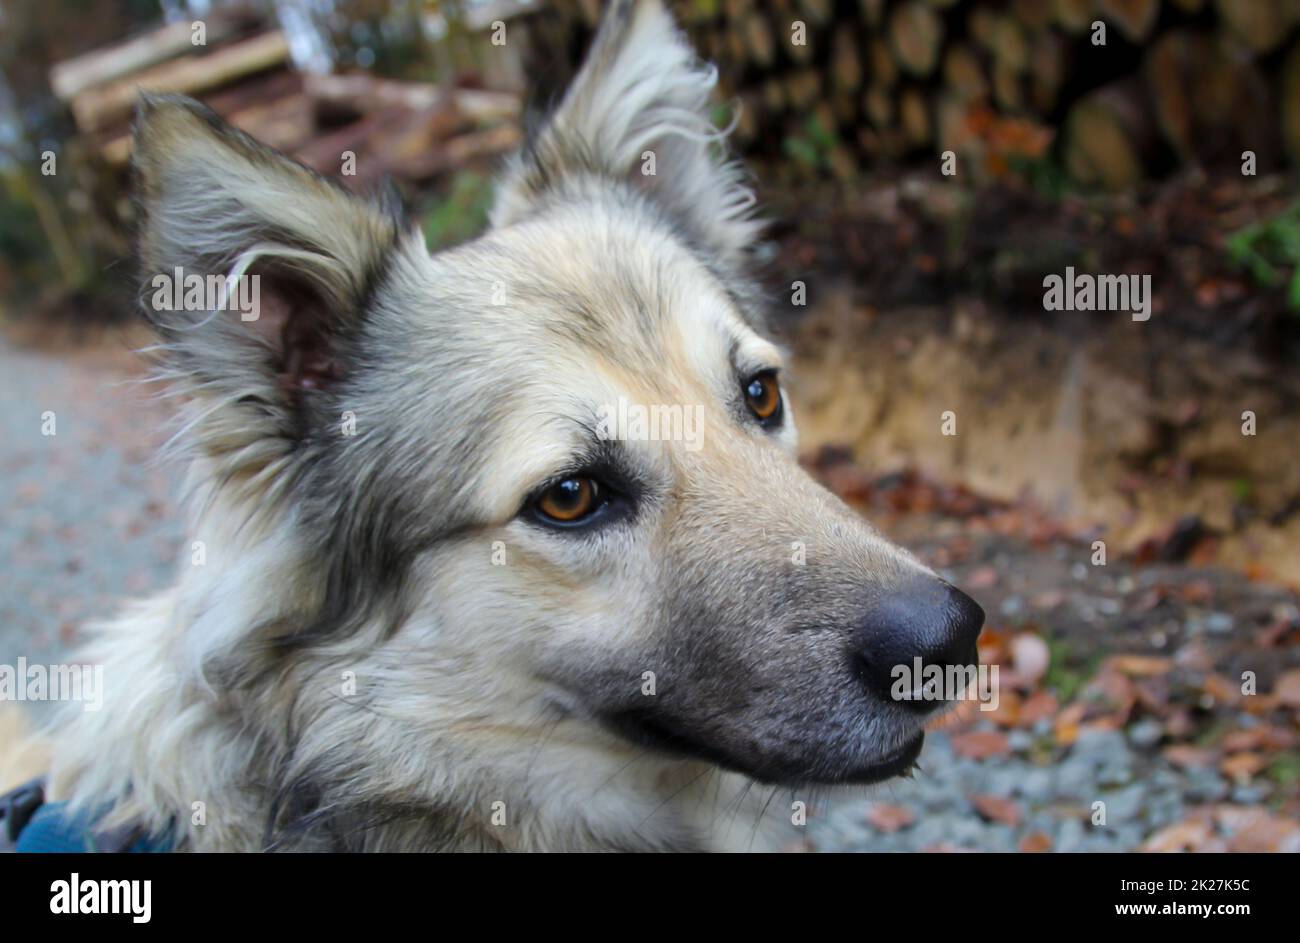 Portrait of a dog in the forest. A dog observes its surroundings. Stock Photo